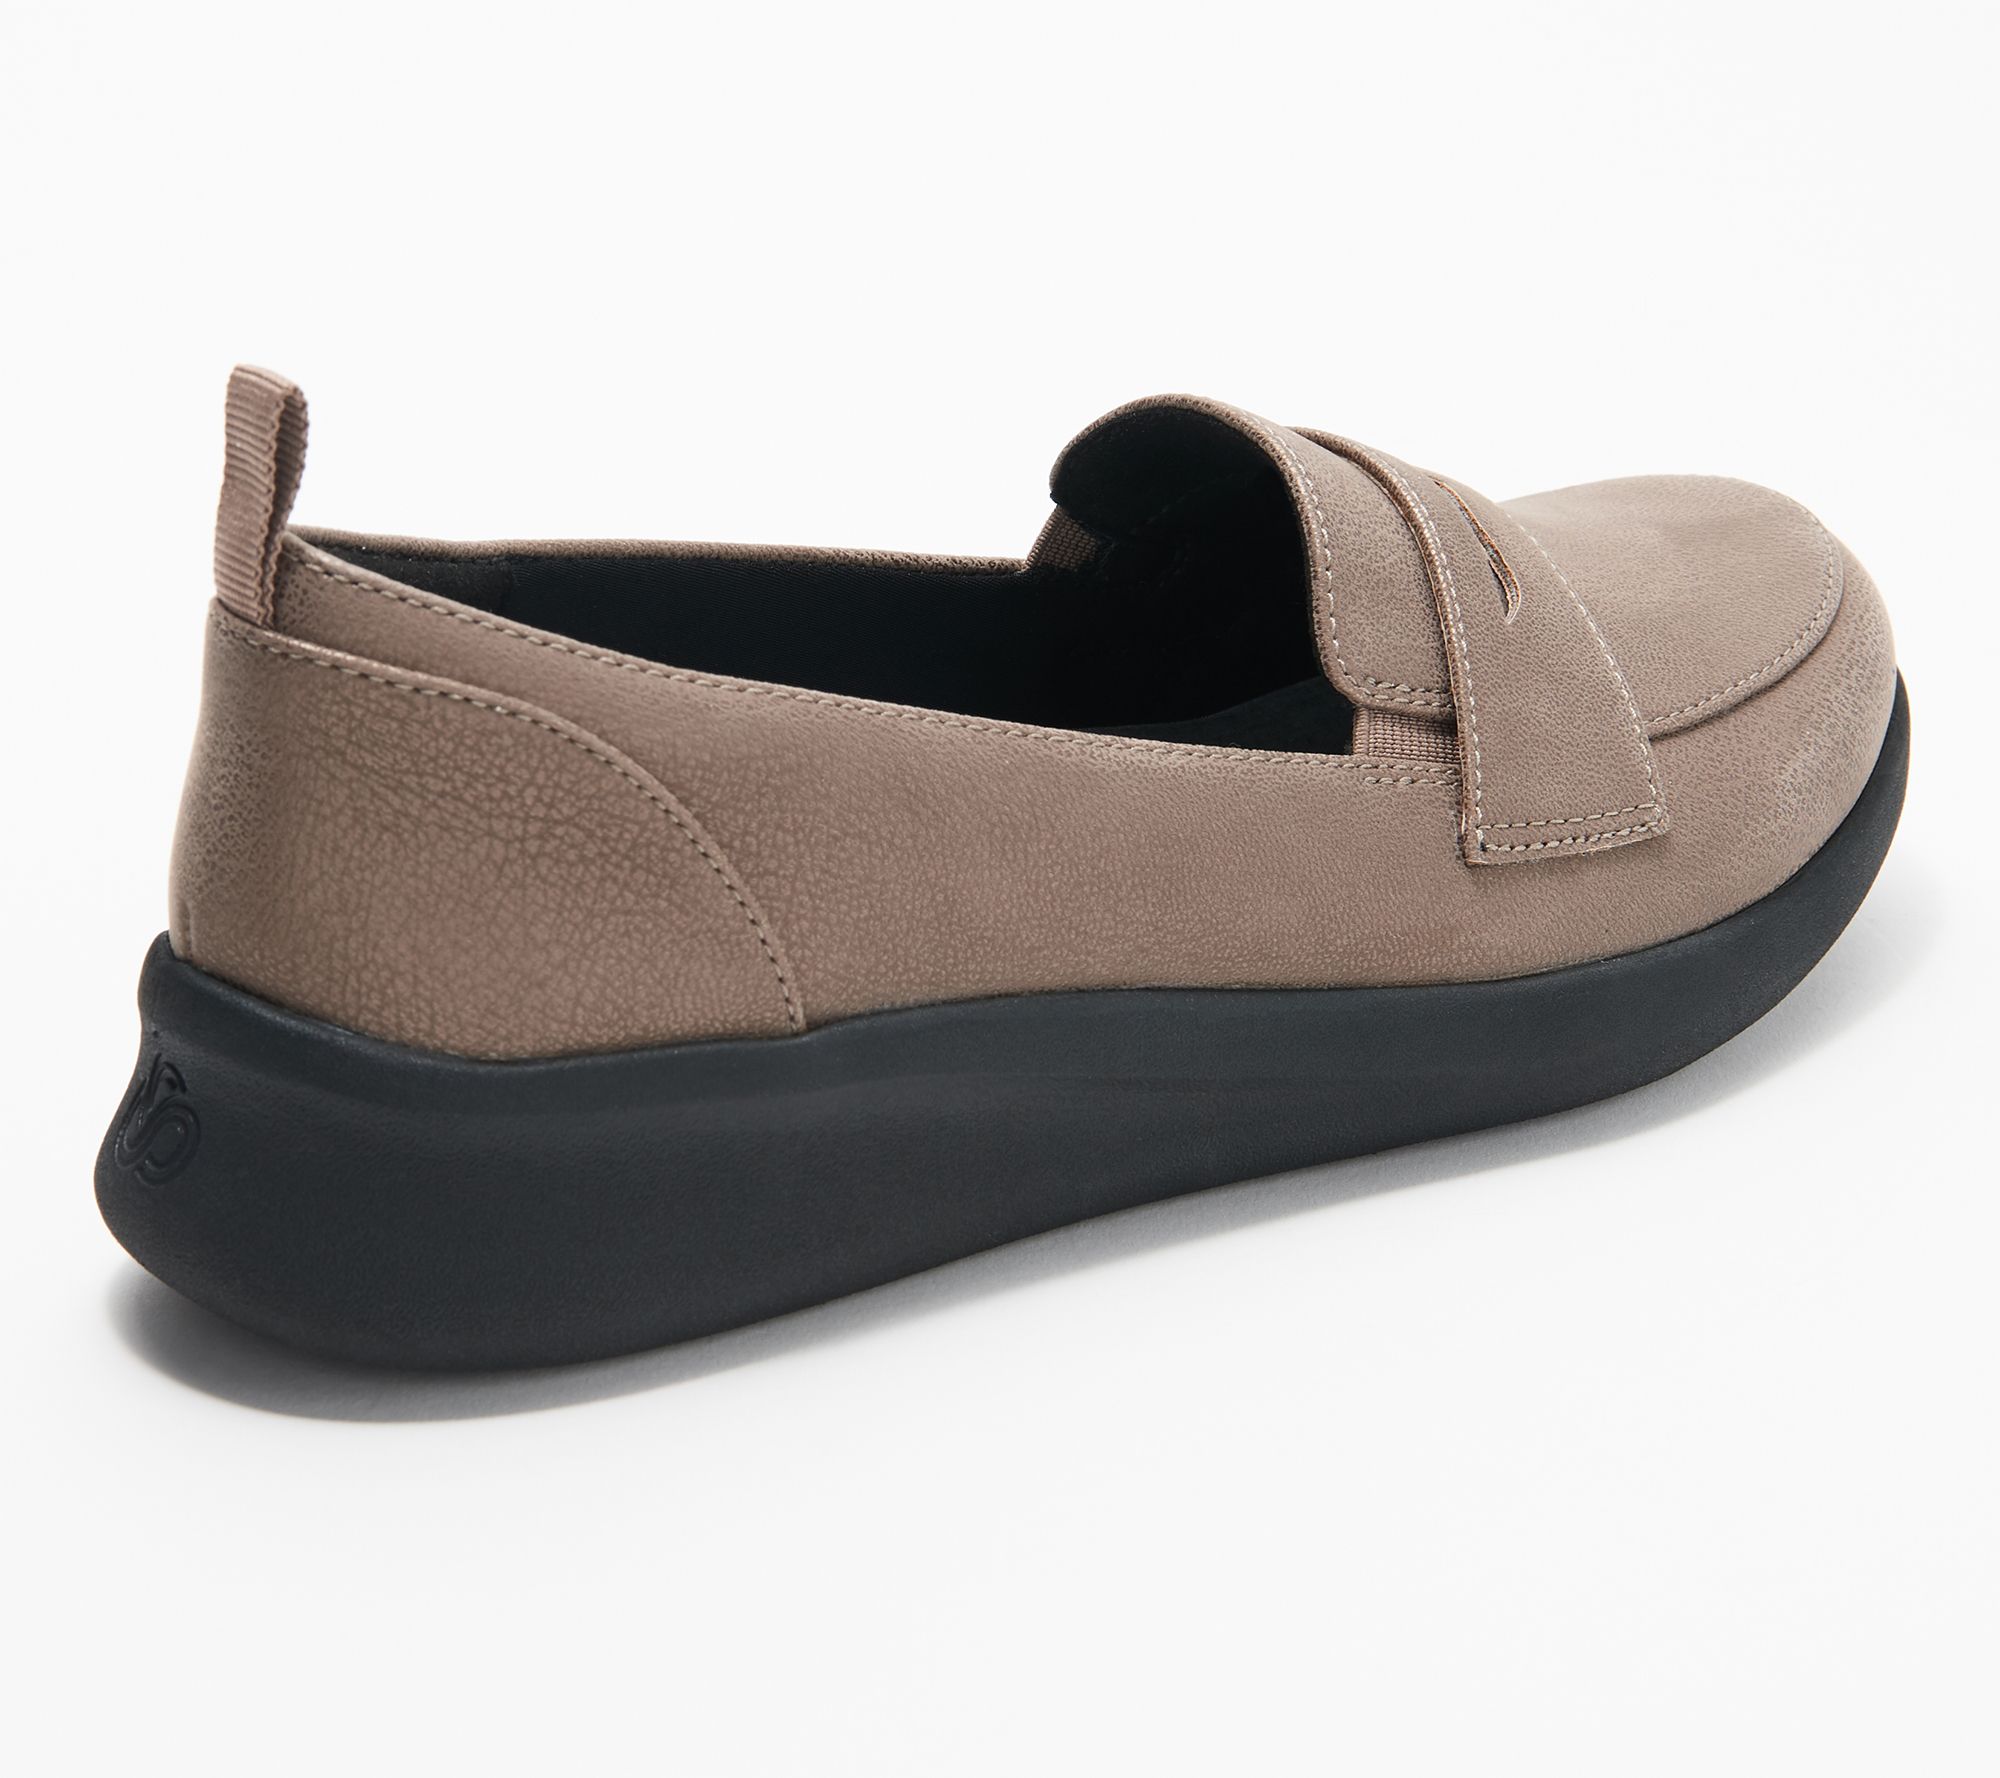 clarks cloudsteppers loafers